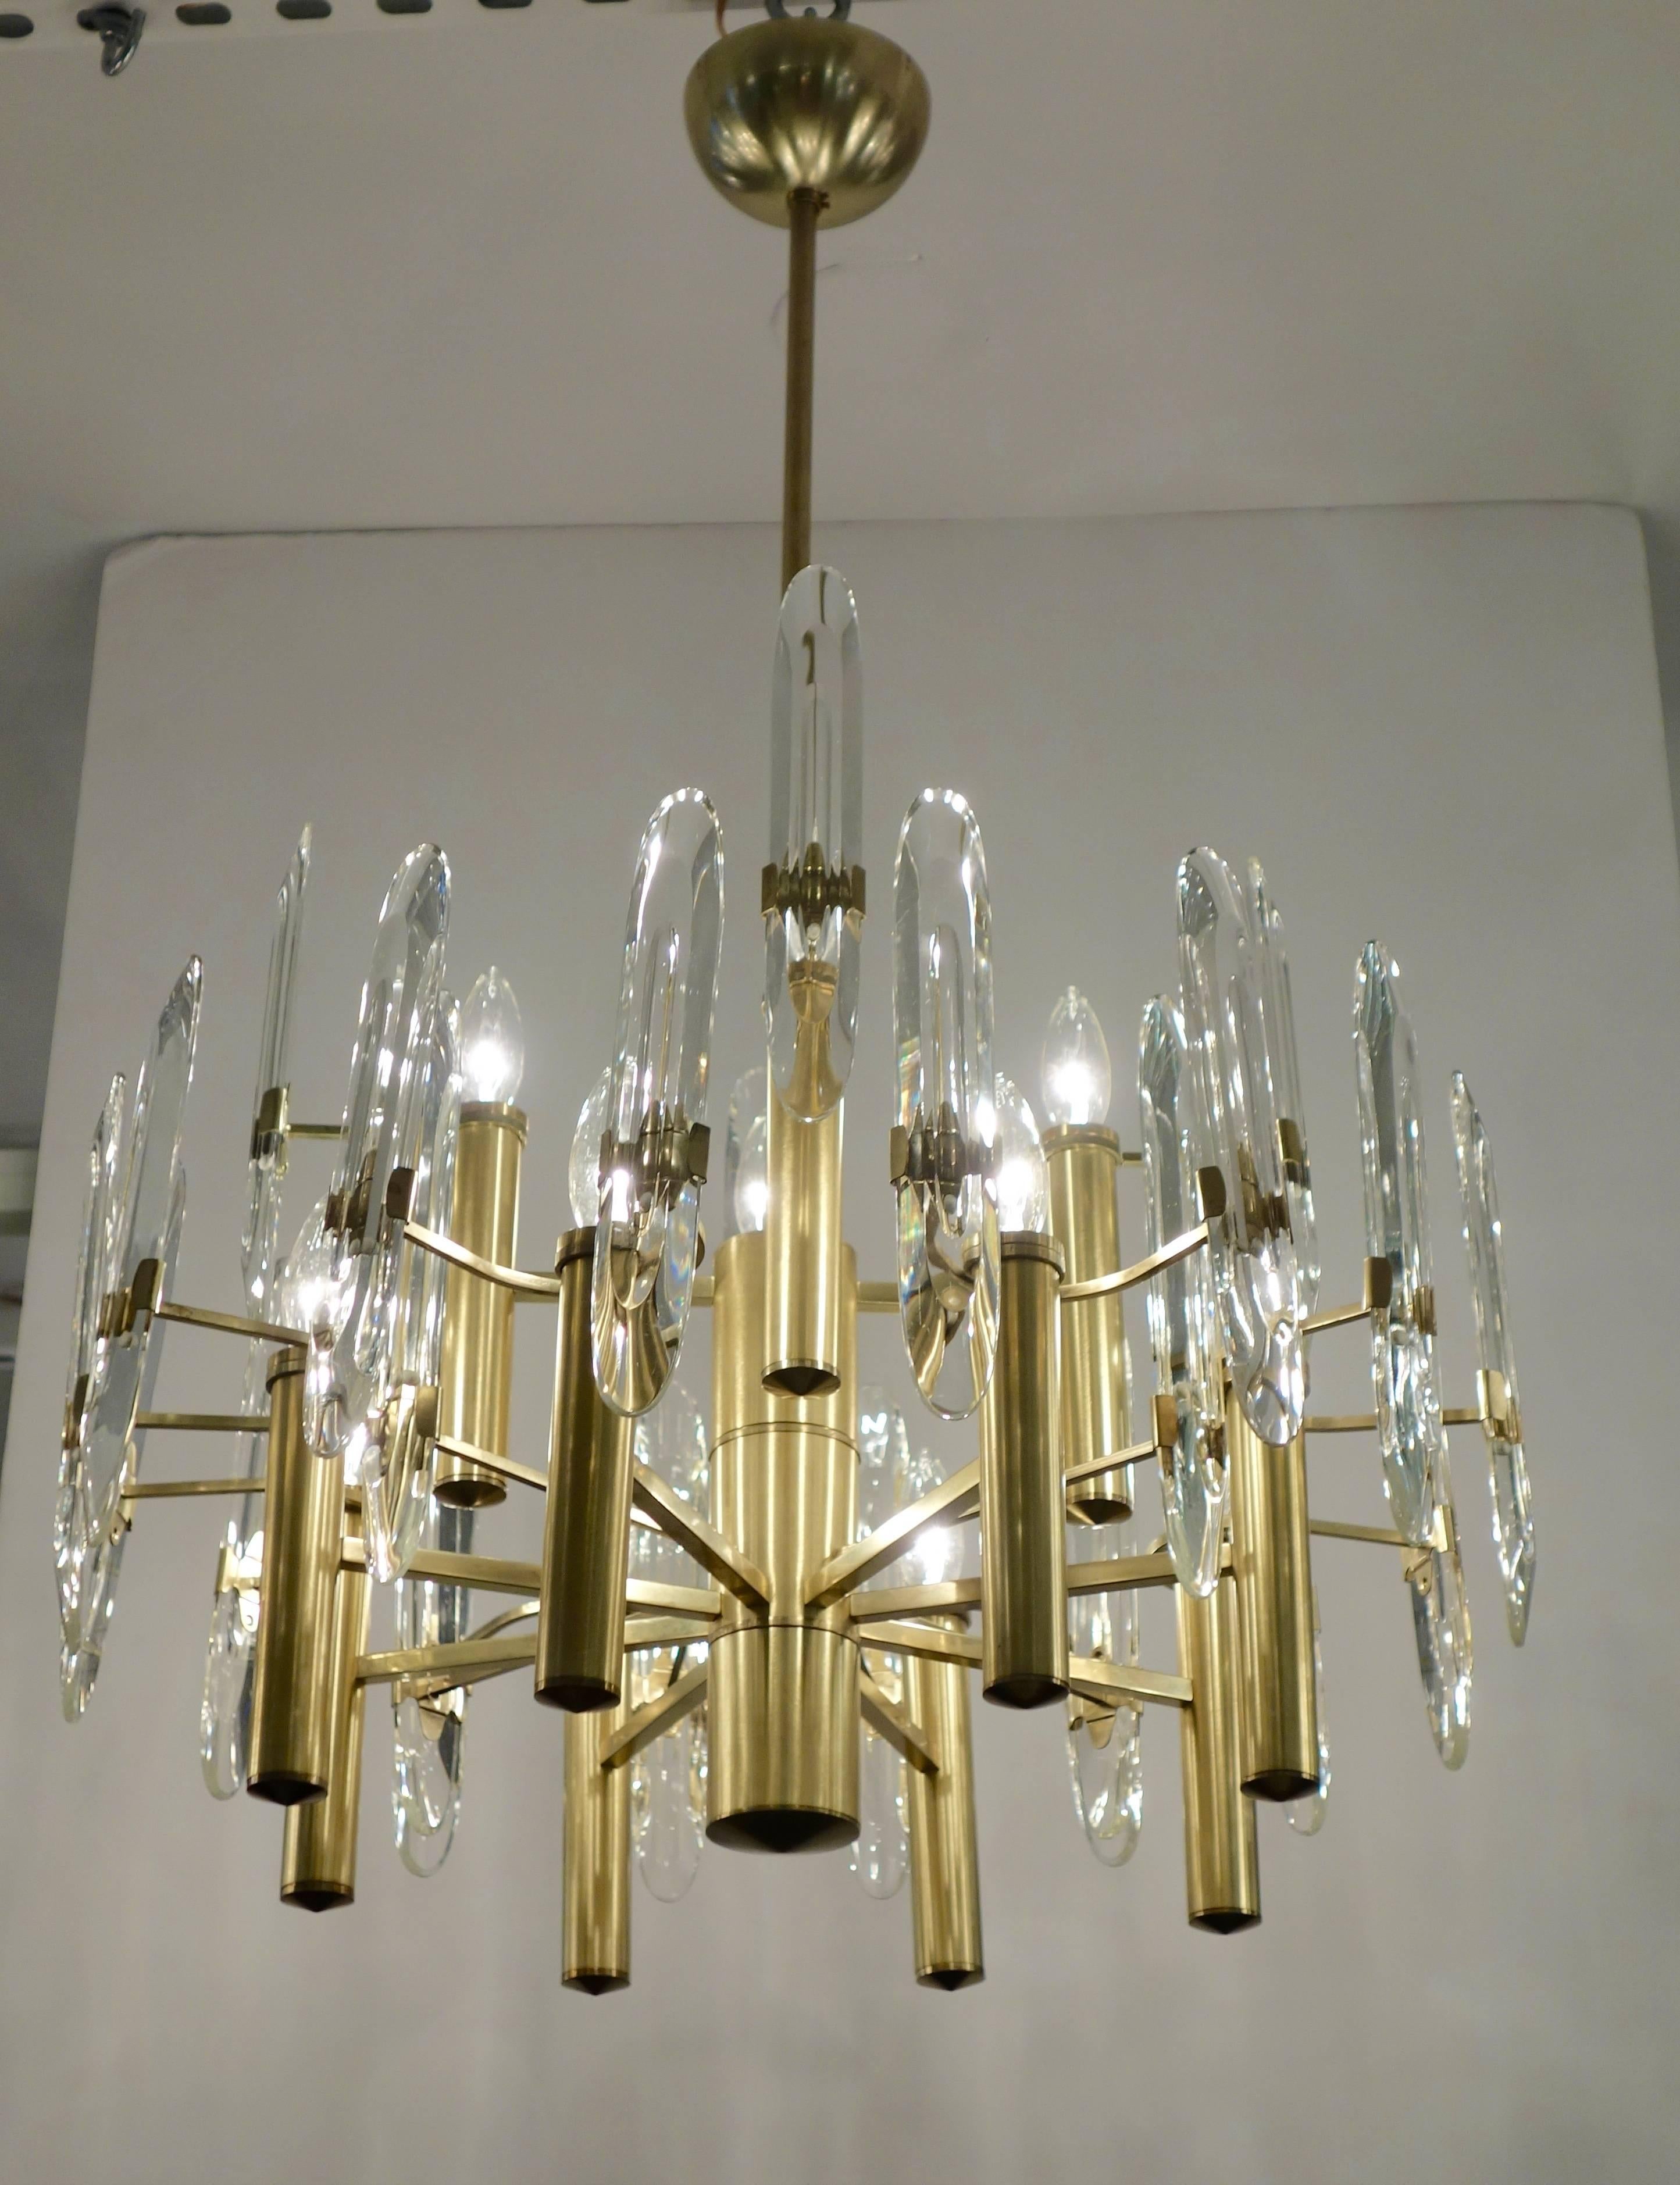 Italian Mid-Century Sciolari chandelier featuring 12 sockets and 24 beveled glass prisms radiating from a central cylinder from multi-levels secured with both double and single arm brackets from the re-plated satin brass frame, rewired for the